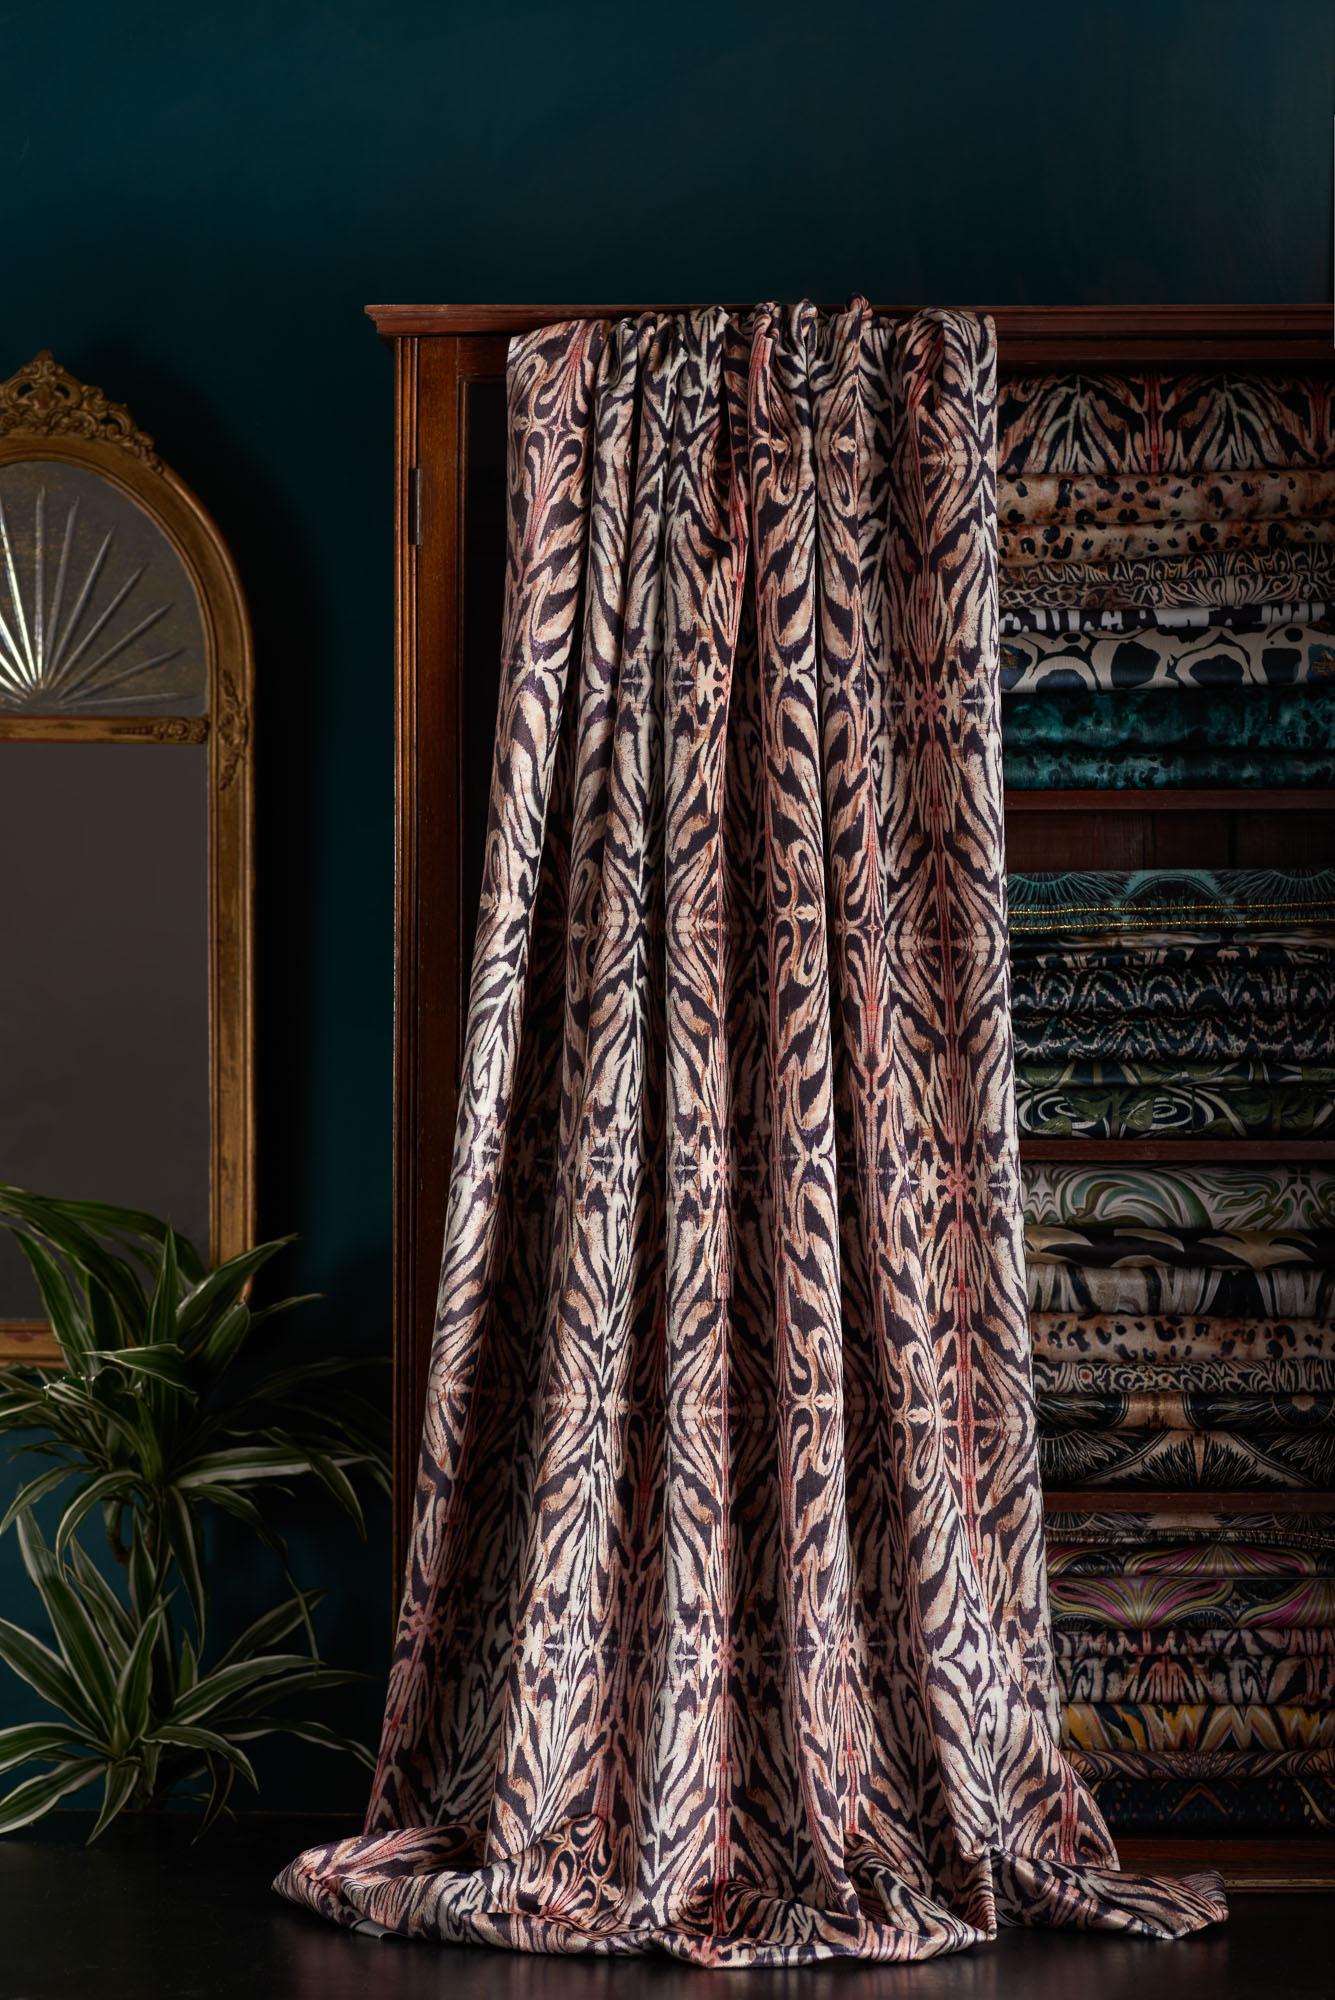 BamBam is a vivid animalesque design hand painted by Anna. Warm pinks, soft black and cream tones mingle to form a tribal, detailed design with a cosy luxurious vibe.

This velvet is thick and luxurious, with a strong straight woven backing. It is